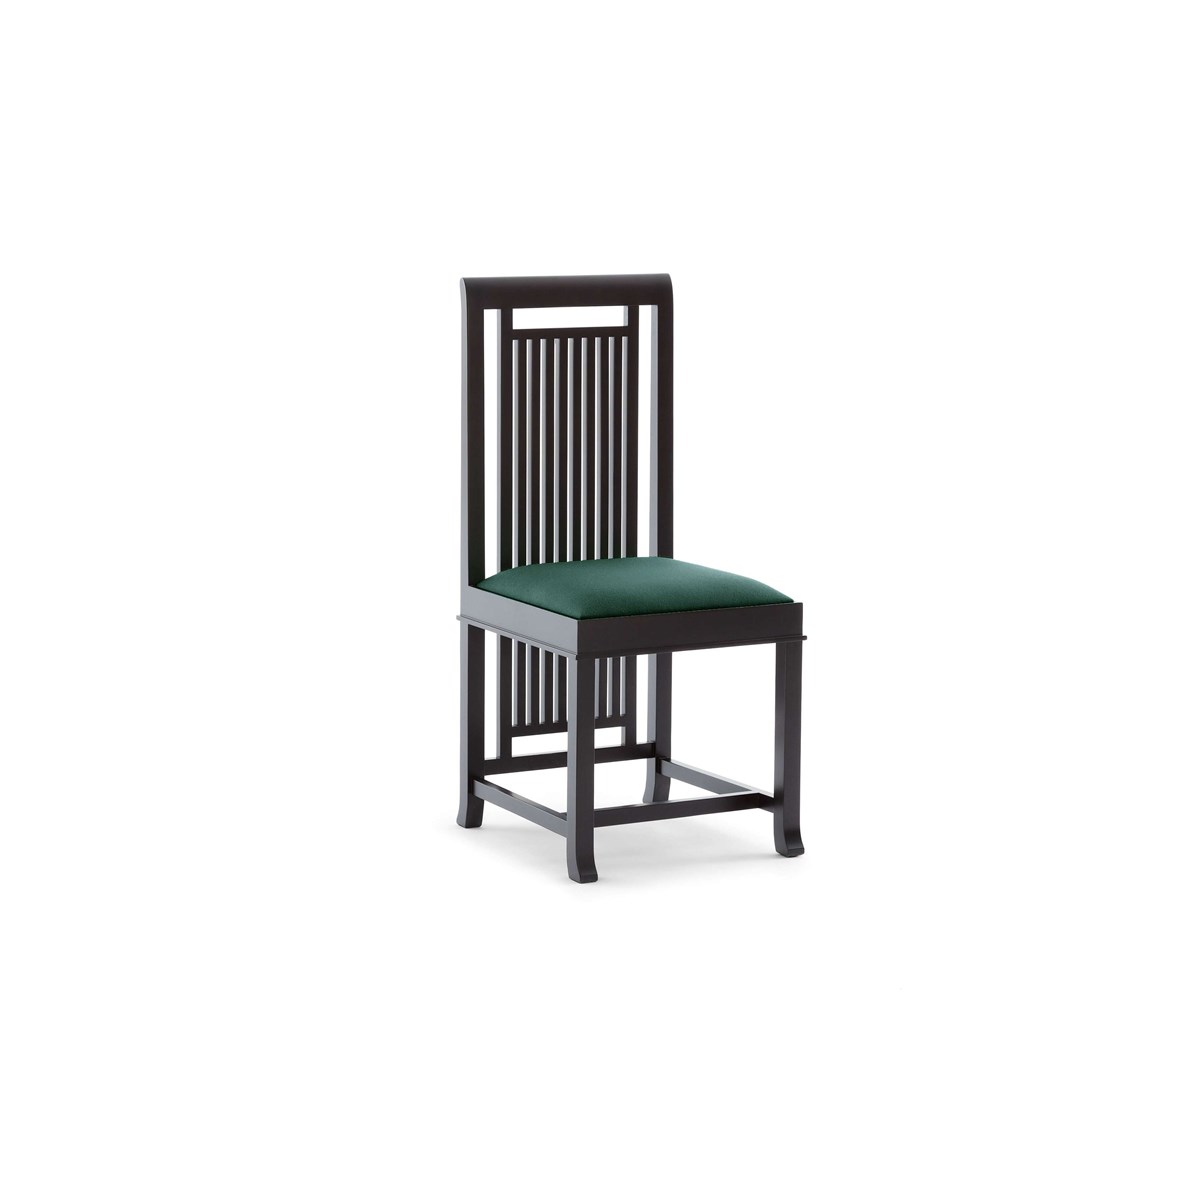 Coonley 2 Dining Chair1